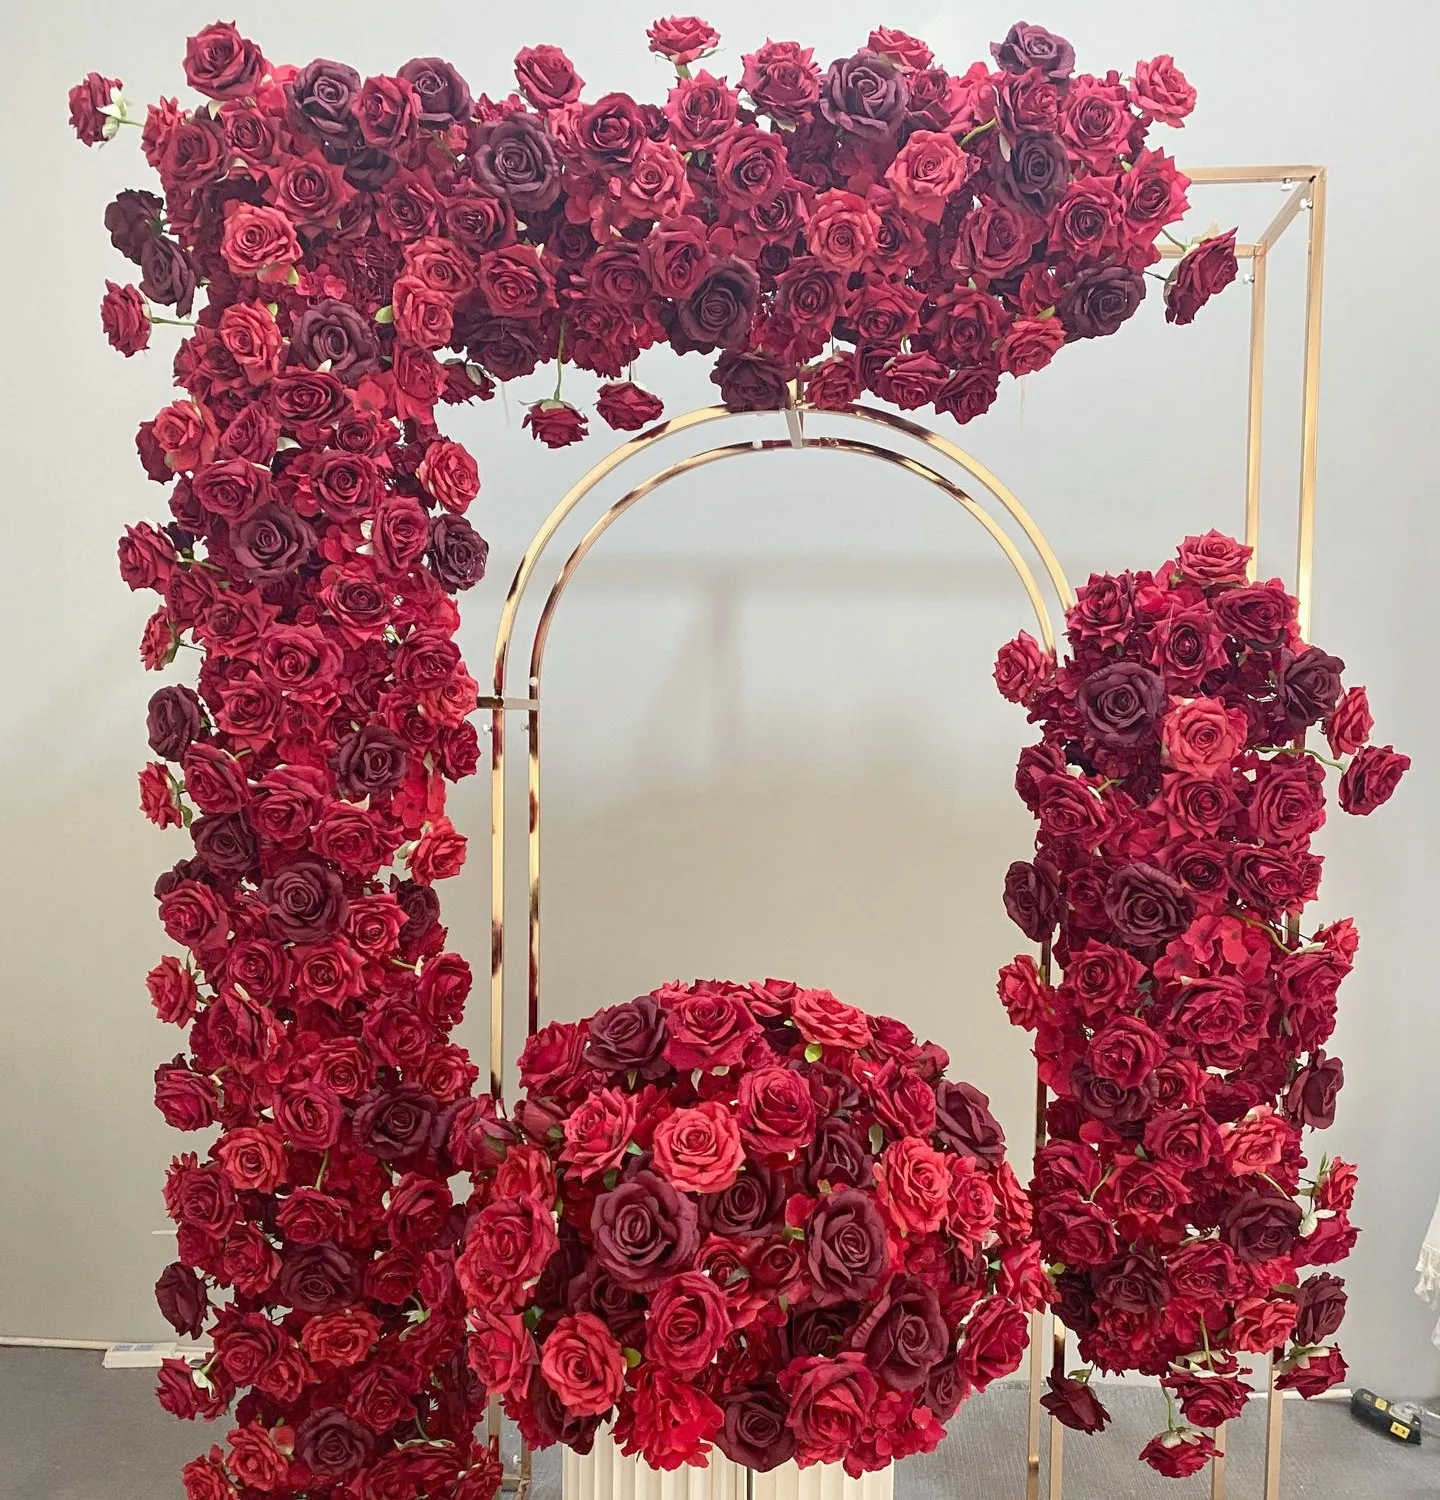 Flowers Wedding Decoration Table Centerpieces Silk Red Rose Artificial Flower Balls for Room Birthday Party Home Wedding Decor